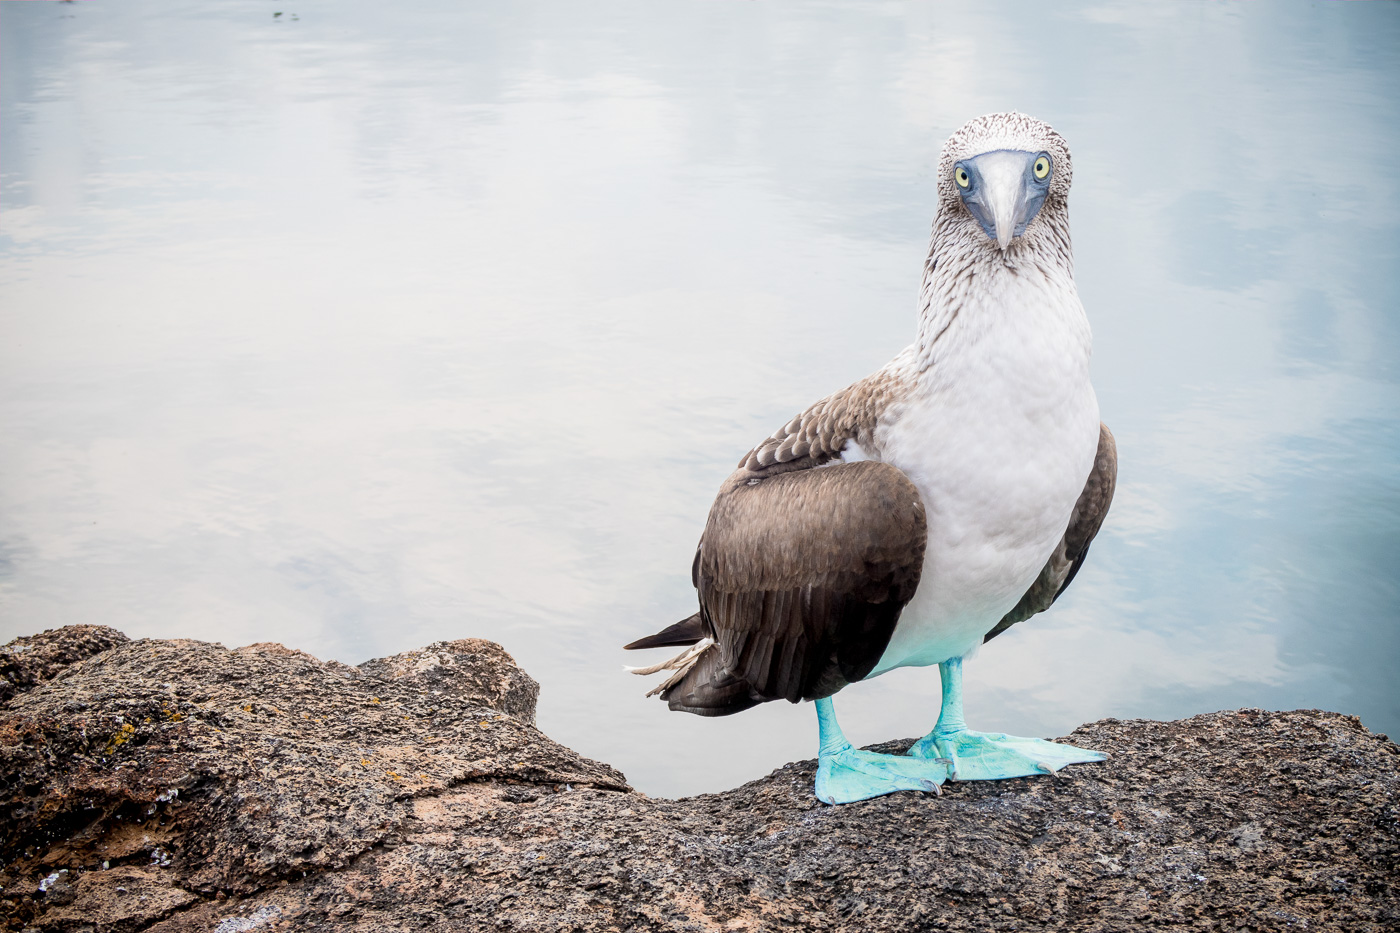 The coolest bird of all time, the Blue Footed Boobie of Galapagos.